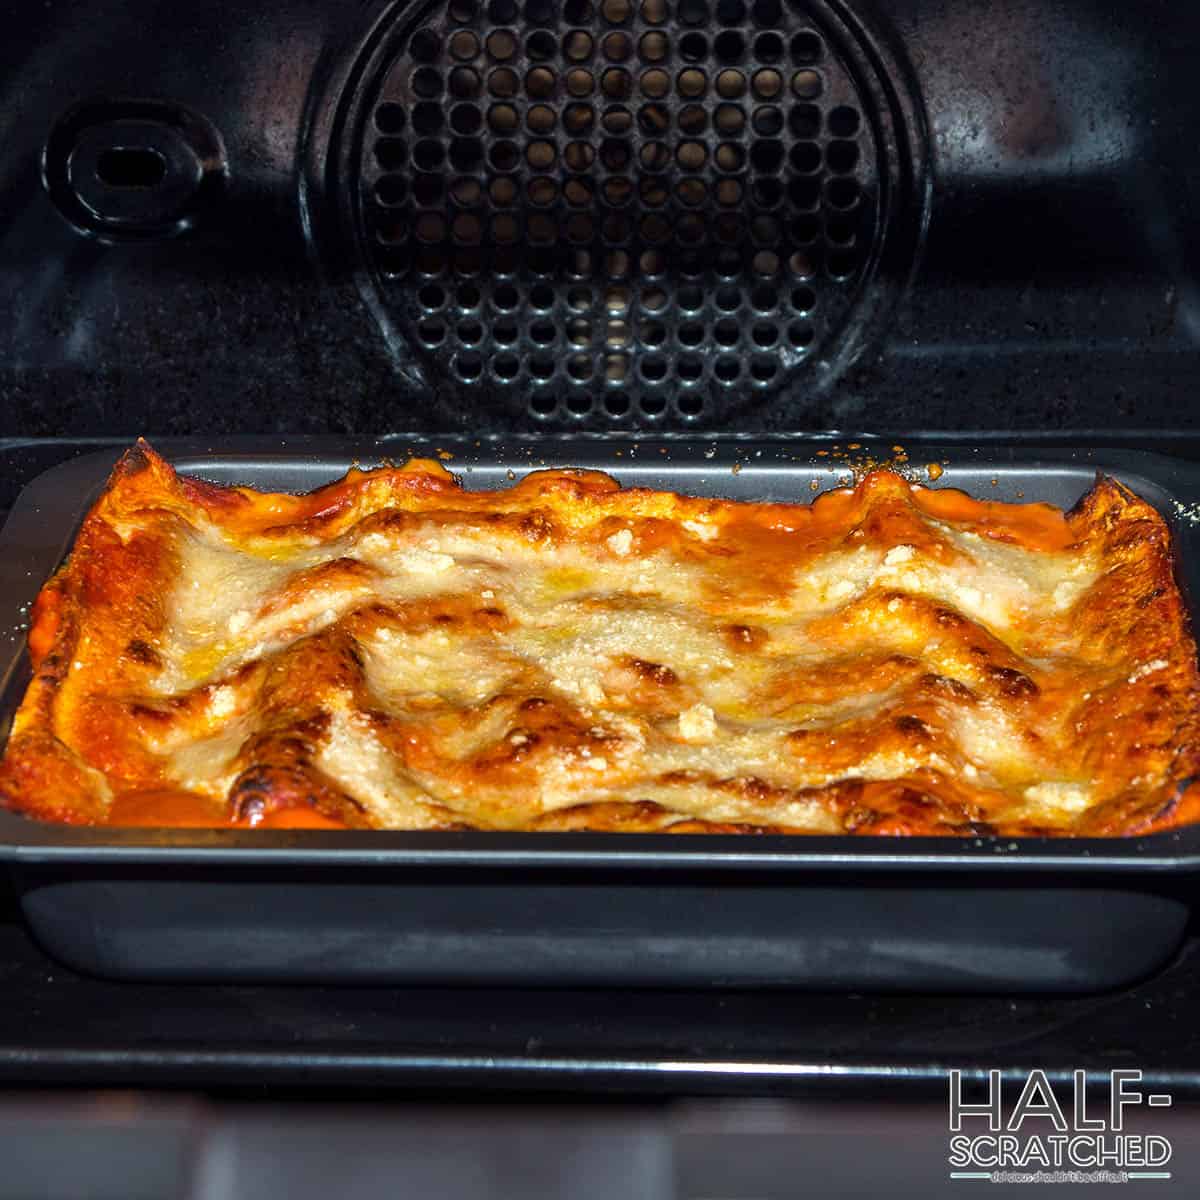 Reheating lasagne in oven